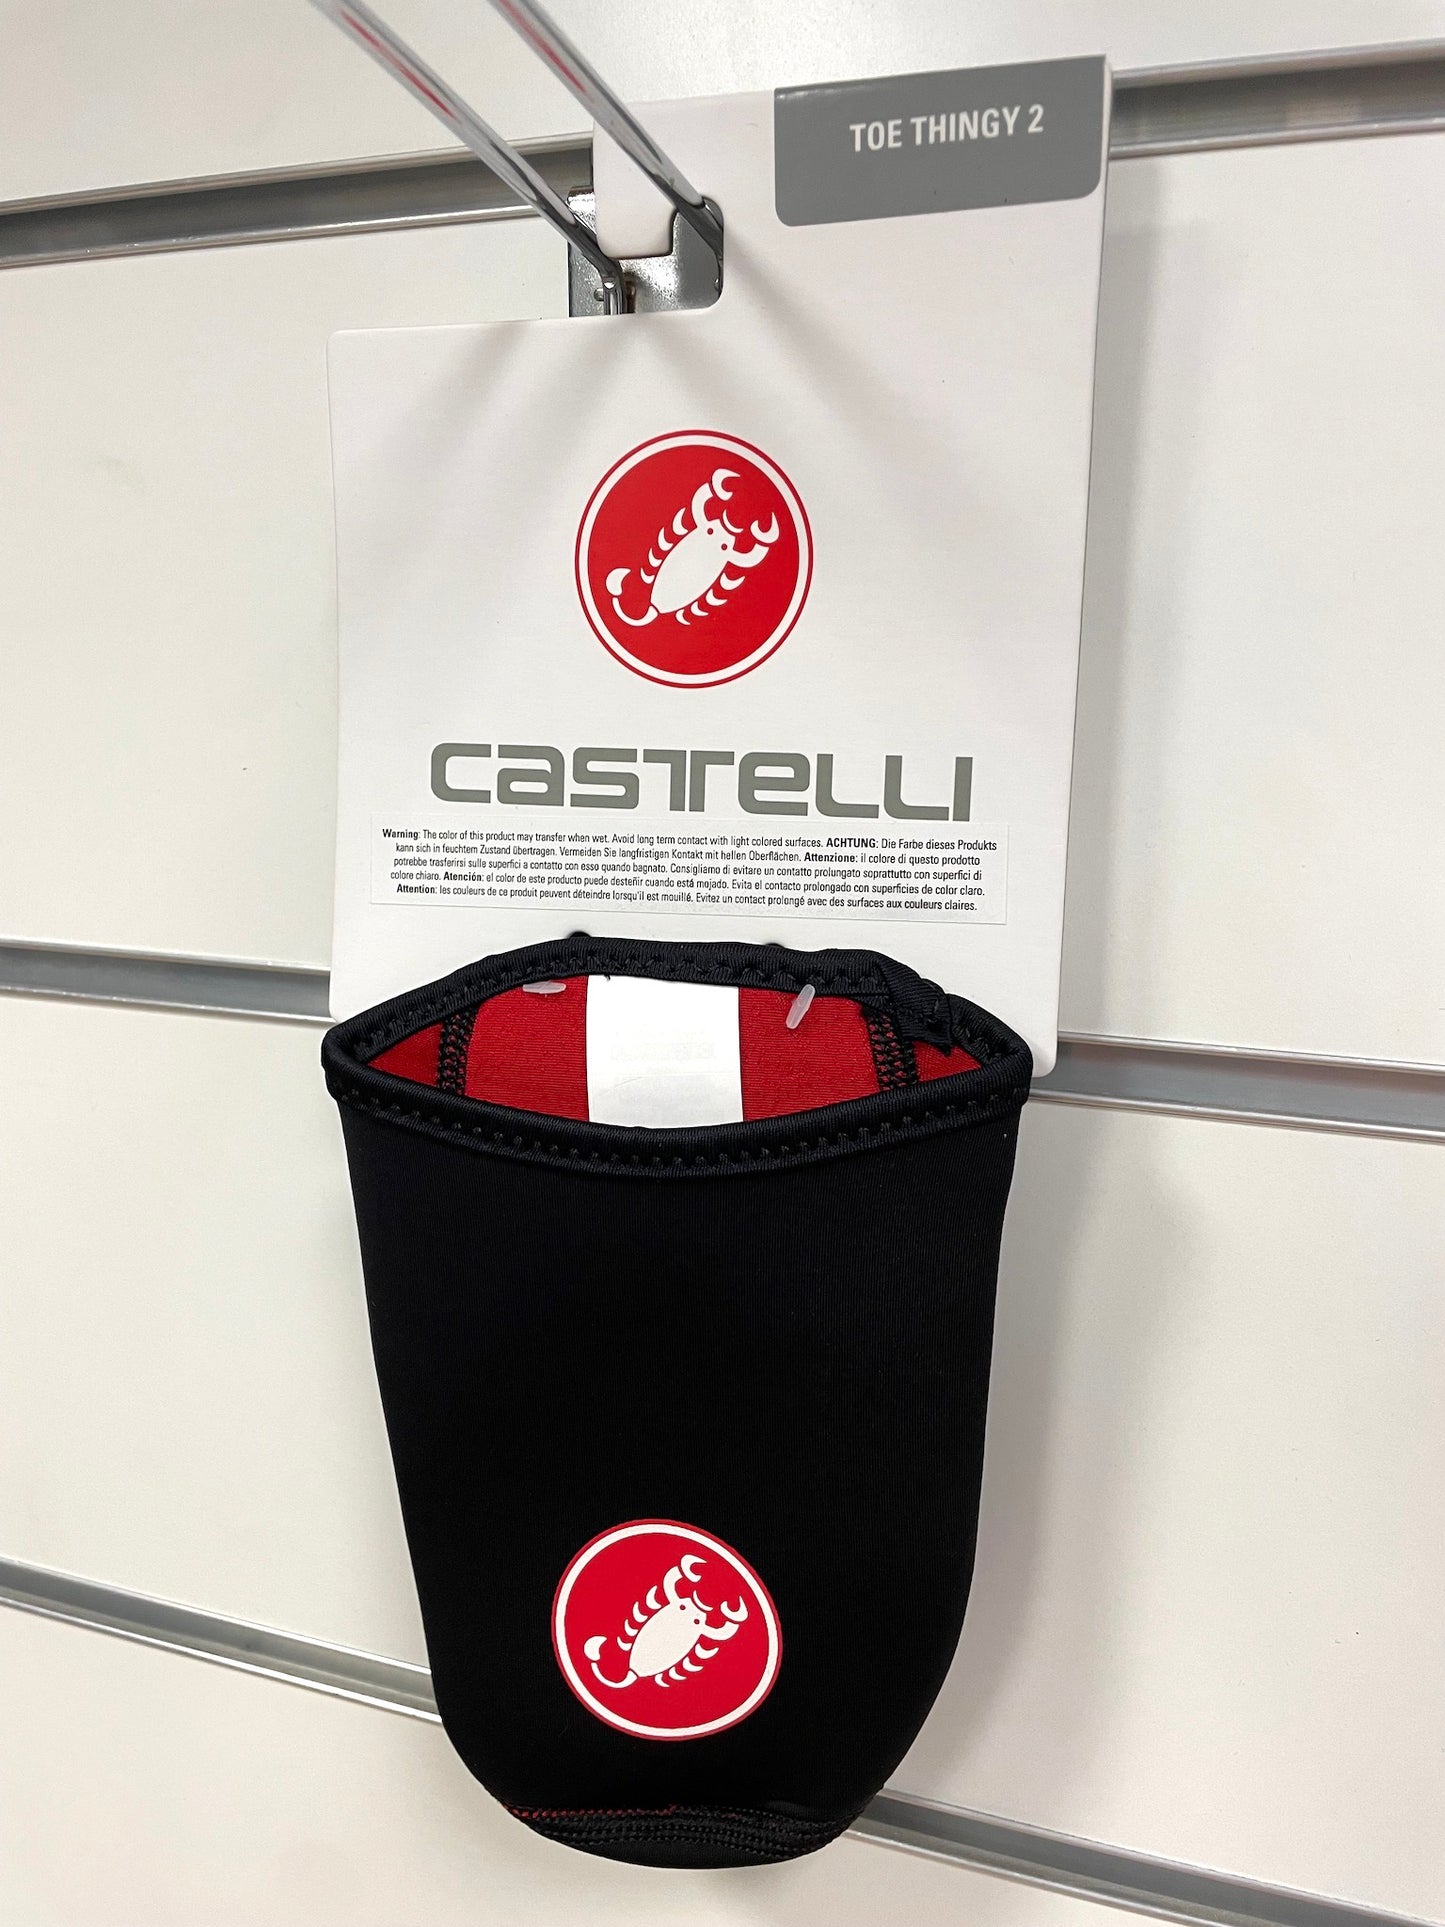 Couvre-chaussures Castelli Toe Thingy 2